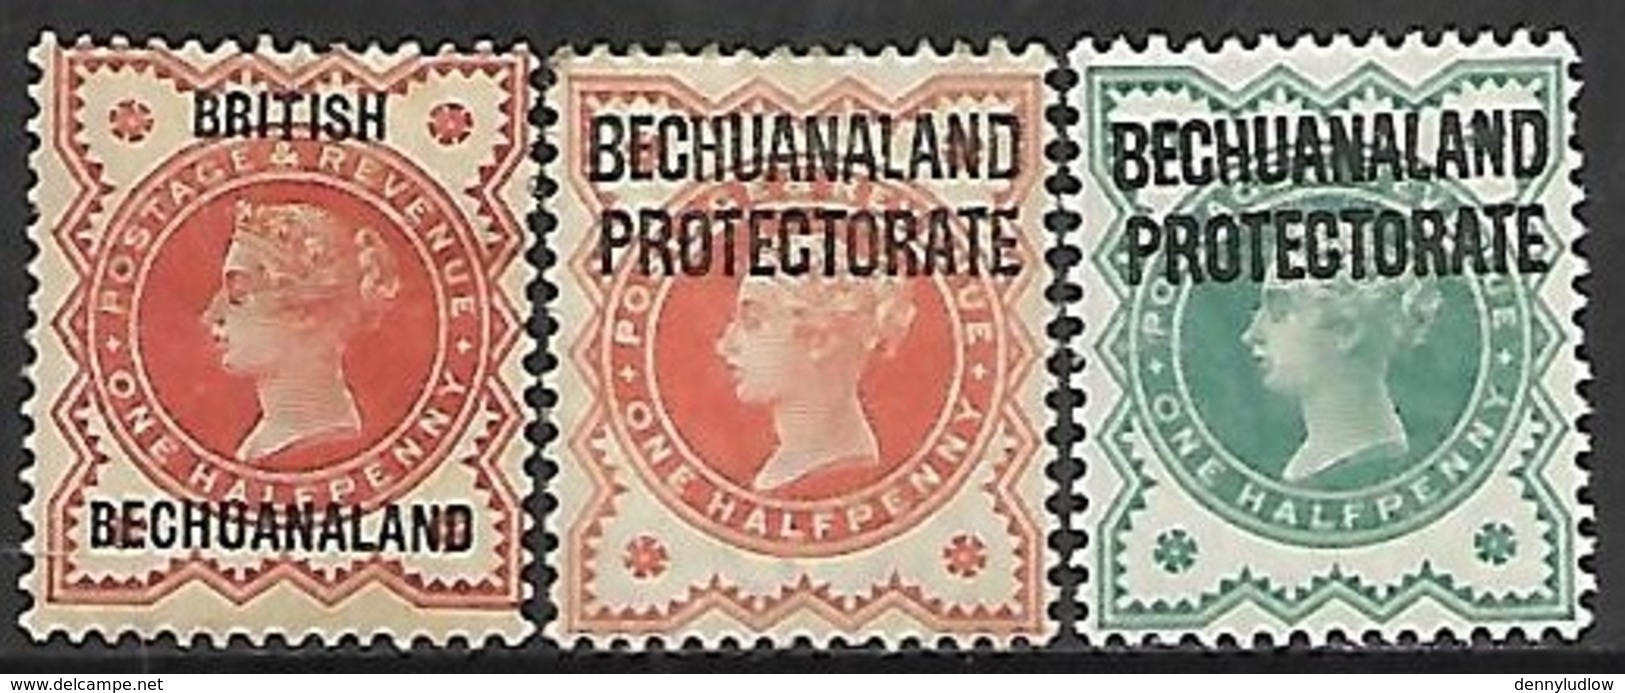 Bechuanaland 1887 Sc#10, 1897 #69, 1902 #75   MH*   2016 Scott Value  $5.50 - 1885-1895 Crown Colony